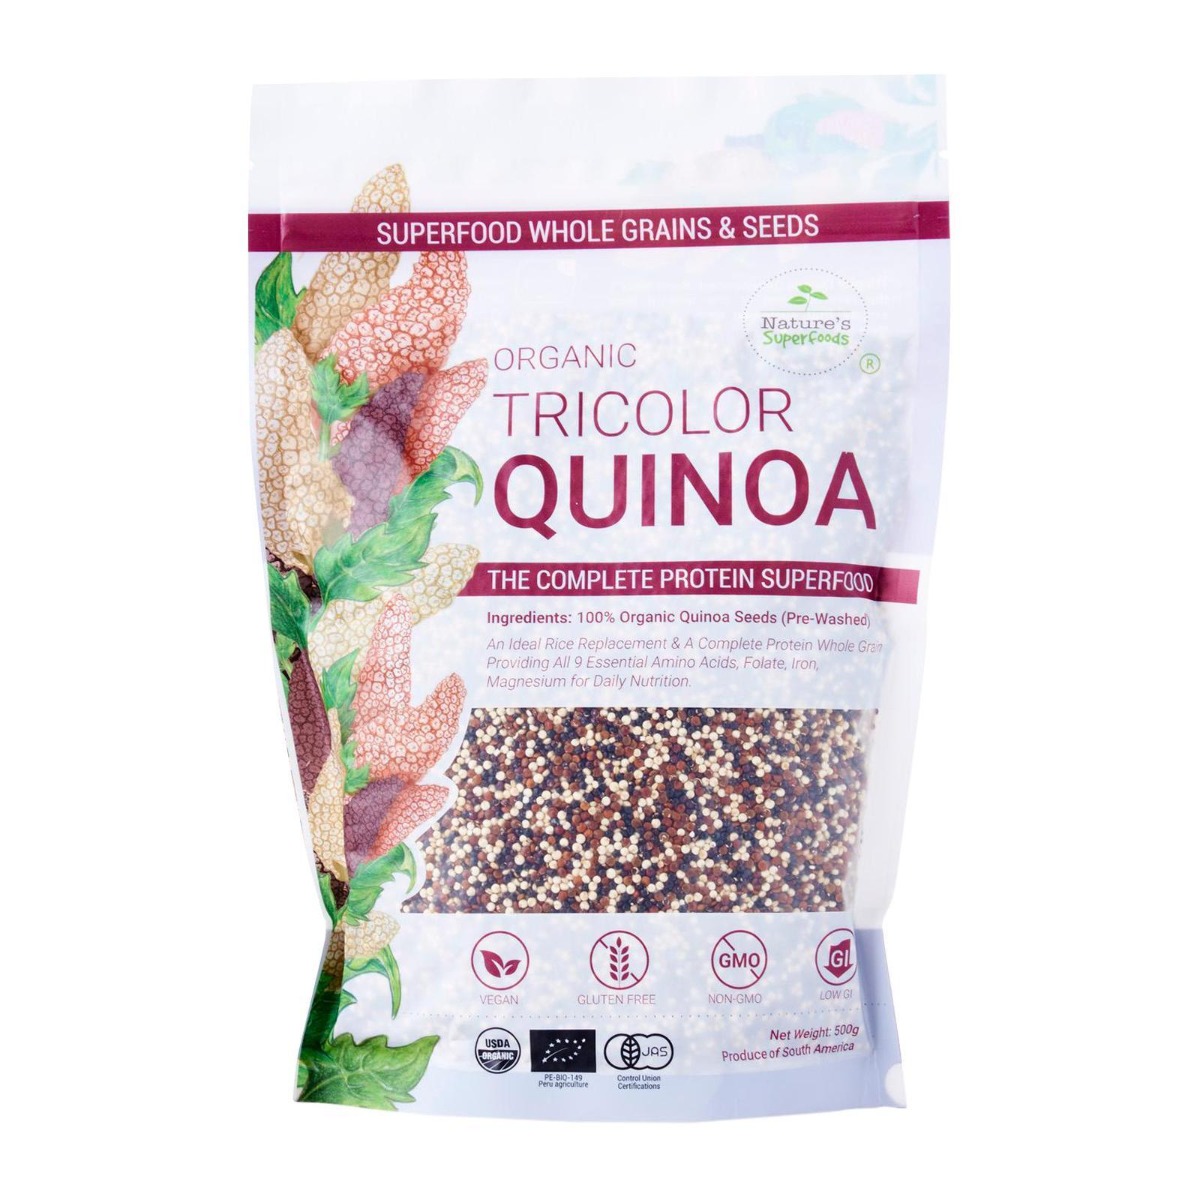 Organic Tricolor Quinoa Seeds  - 500g resealable pack front